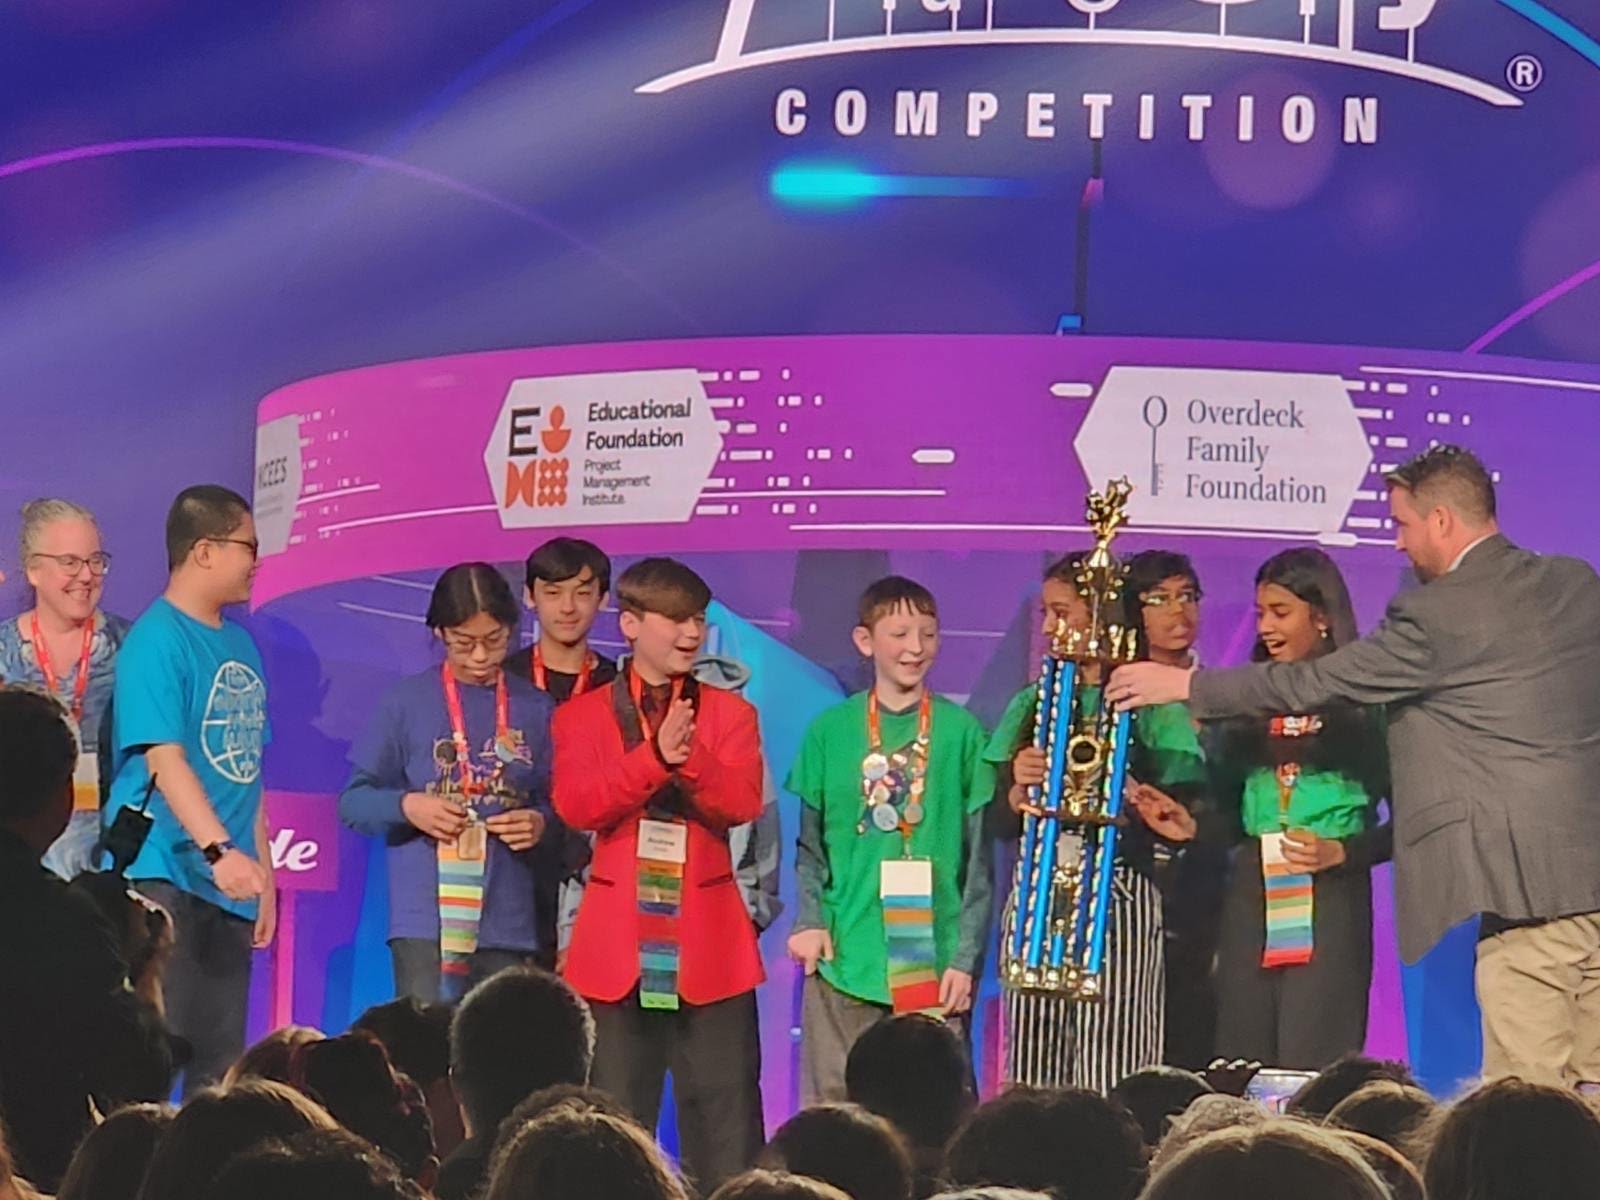 A group of students are standing on a stage, an adult is handing a large trophy to one of the students